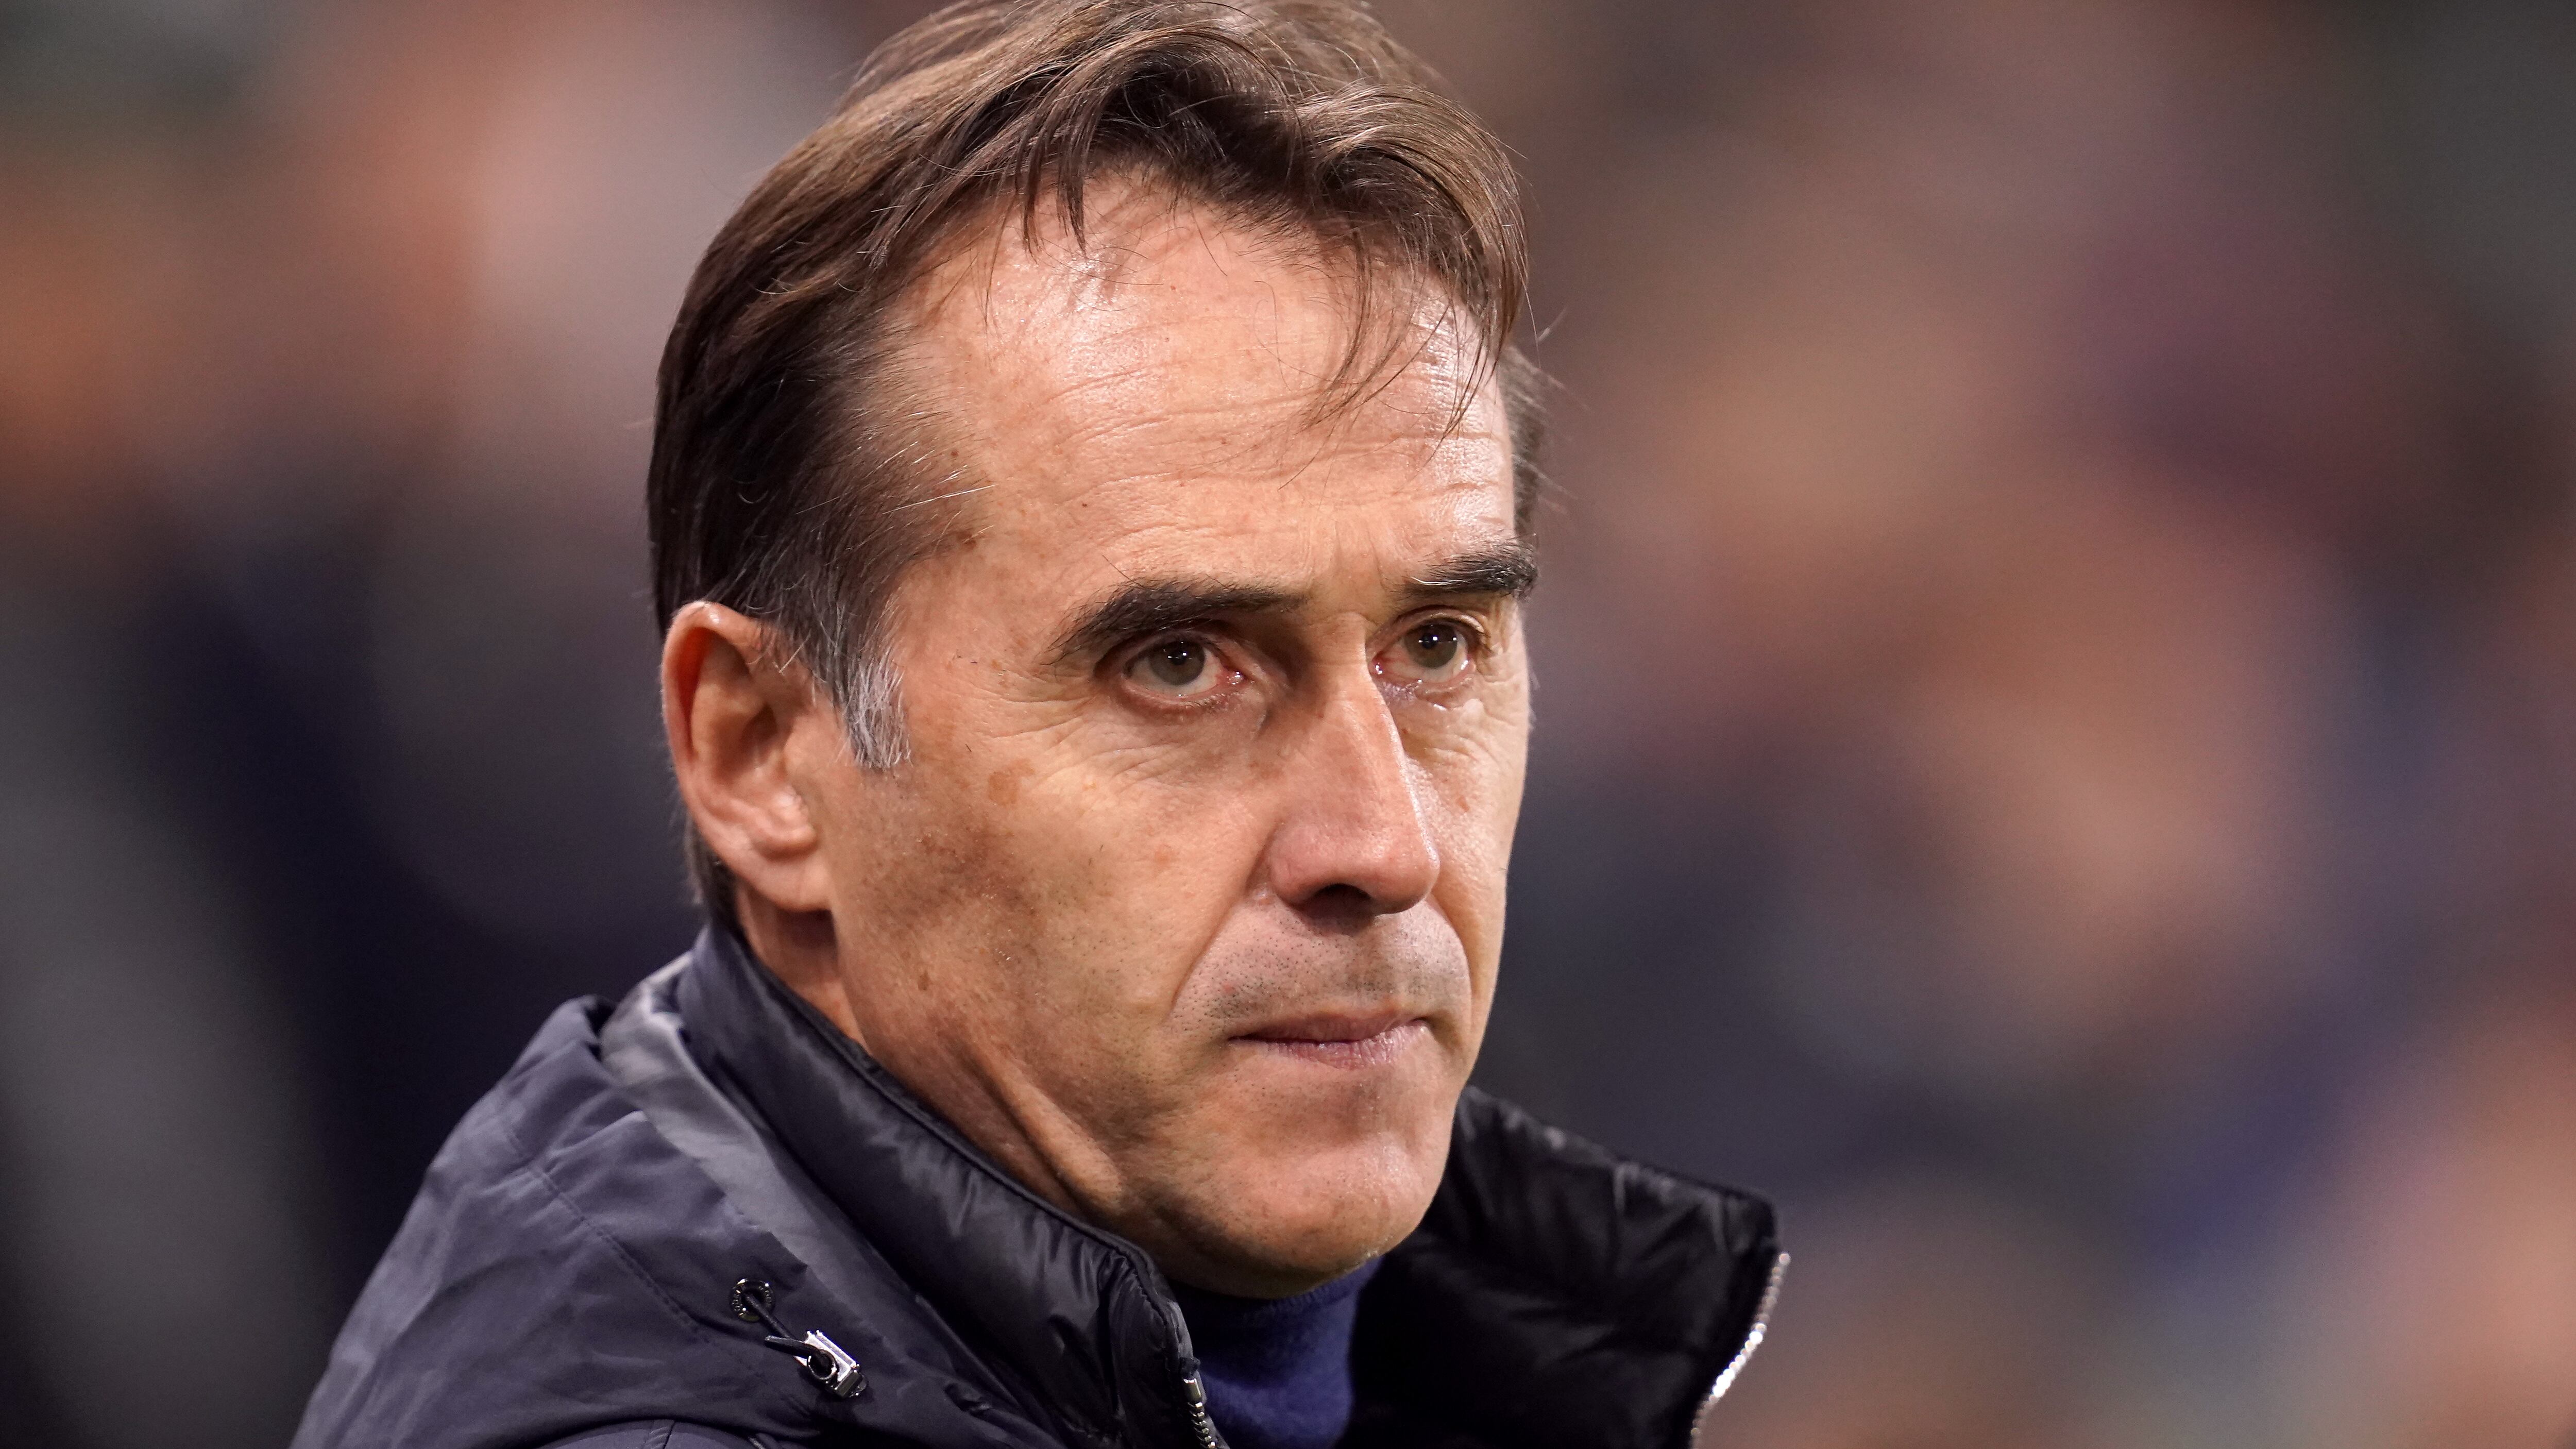 Julen Lopetegui has agreed a deal to become the new West Ham manager on a three-year deal